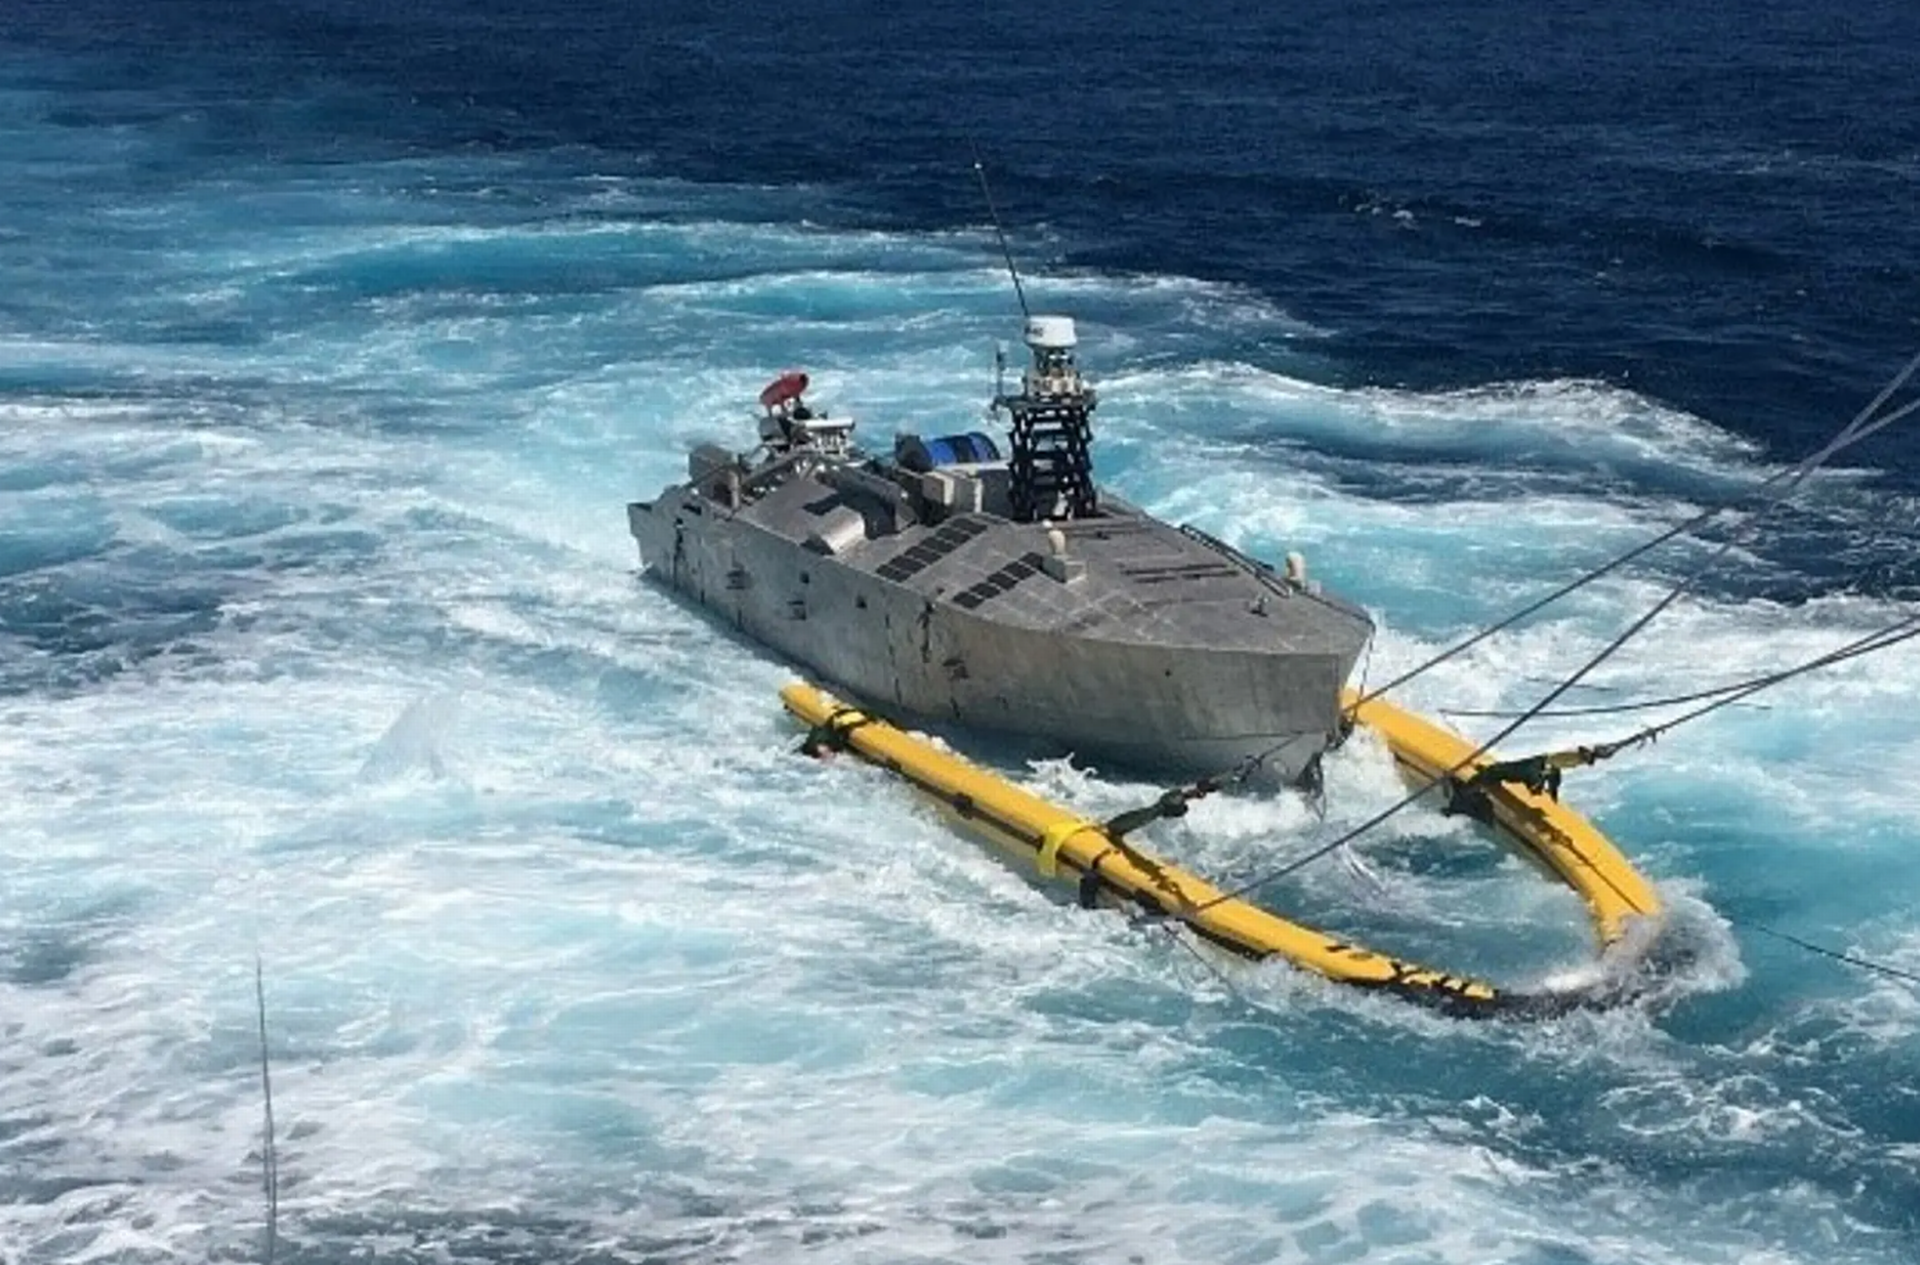 The US Navy has received its first robotic boat